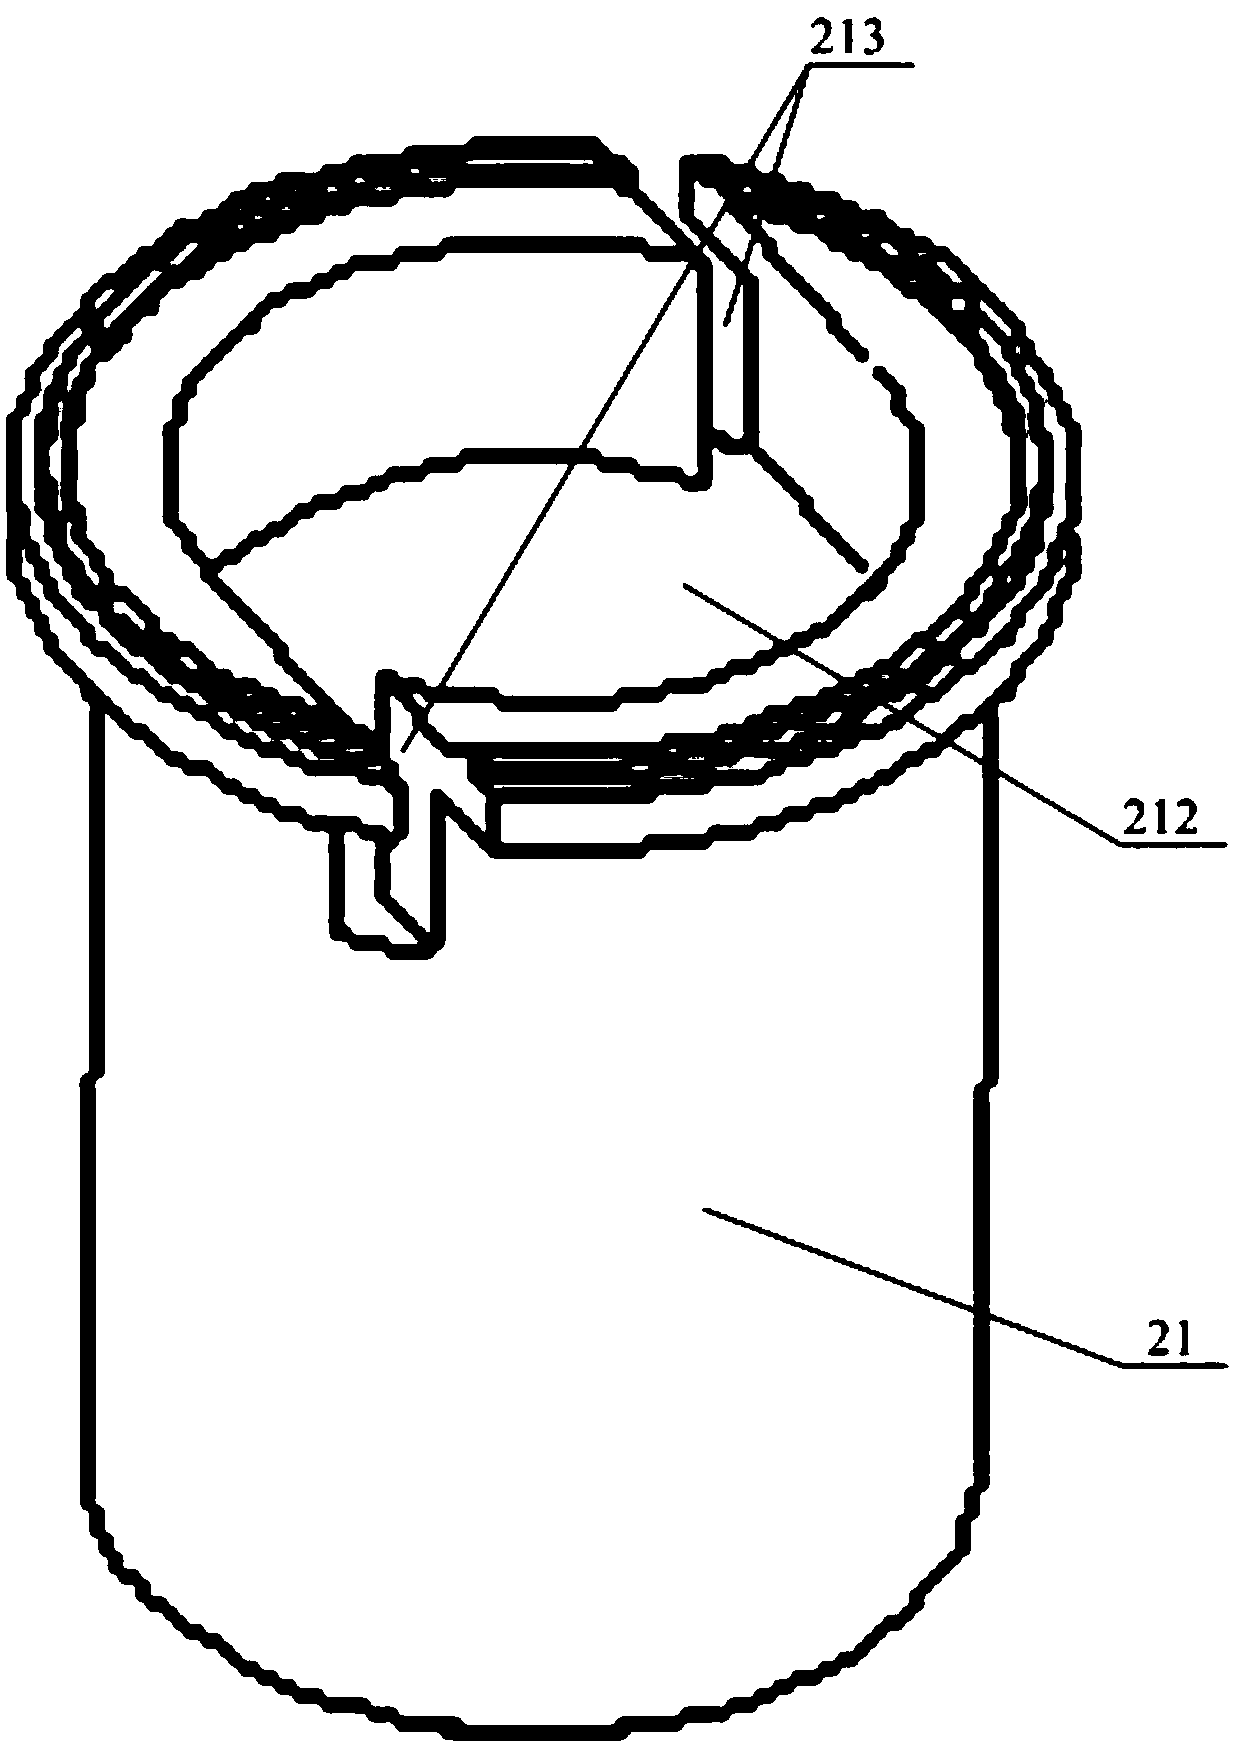 Lead-acid storage battery and exhaust valve assembly